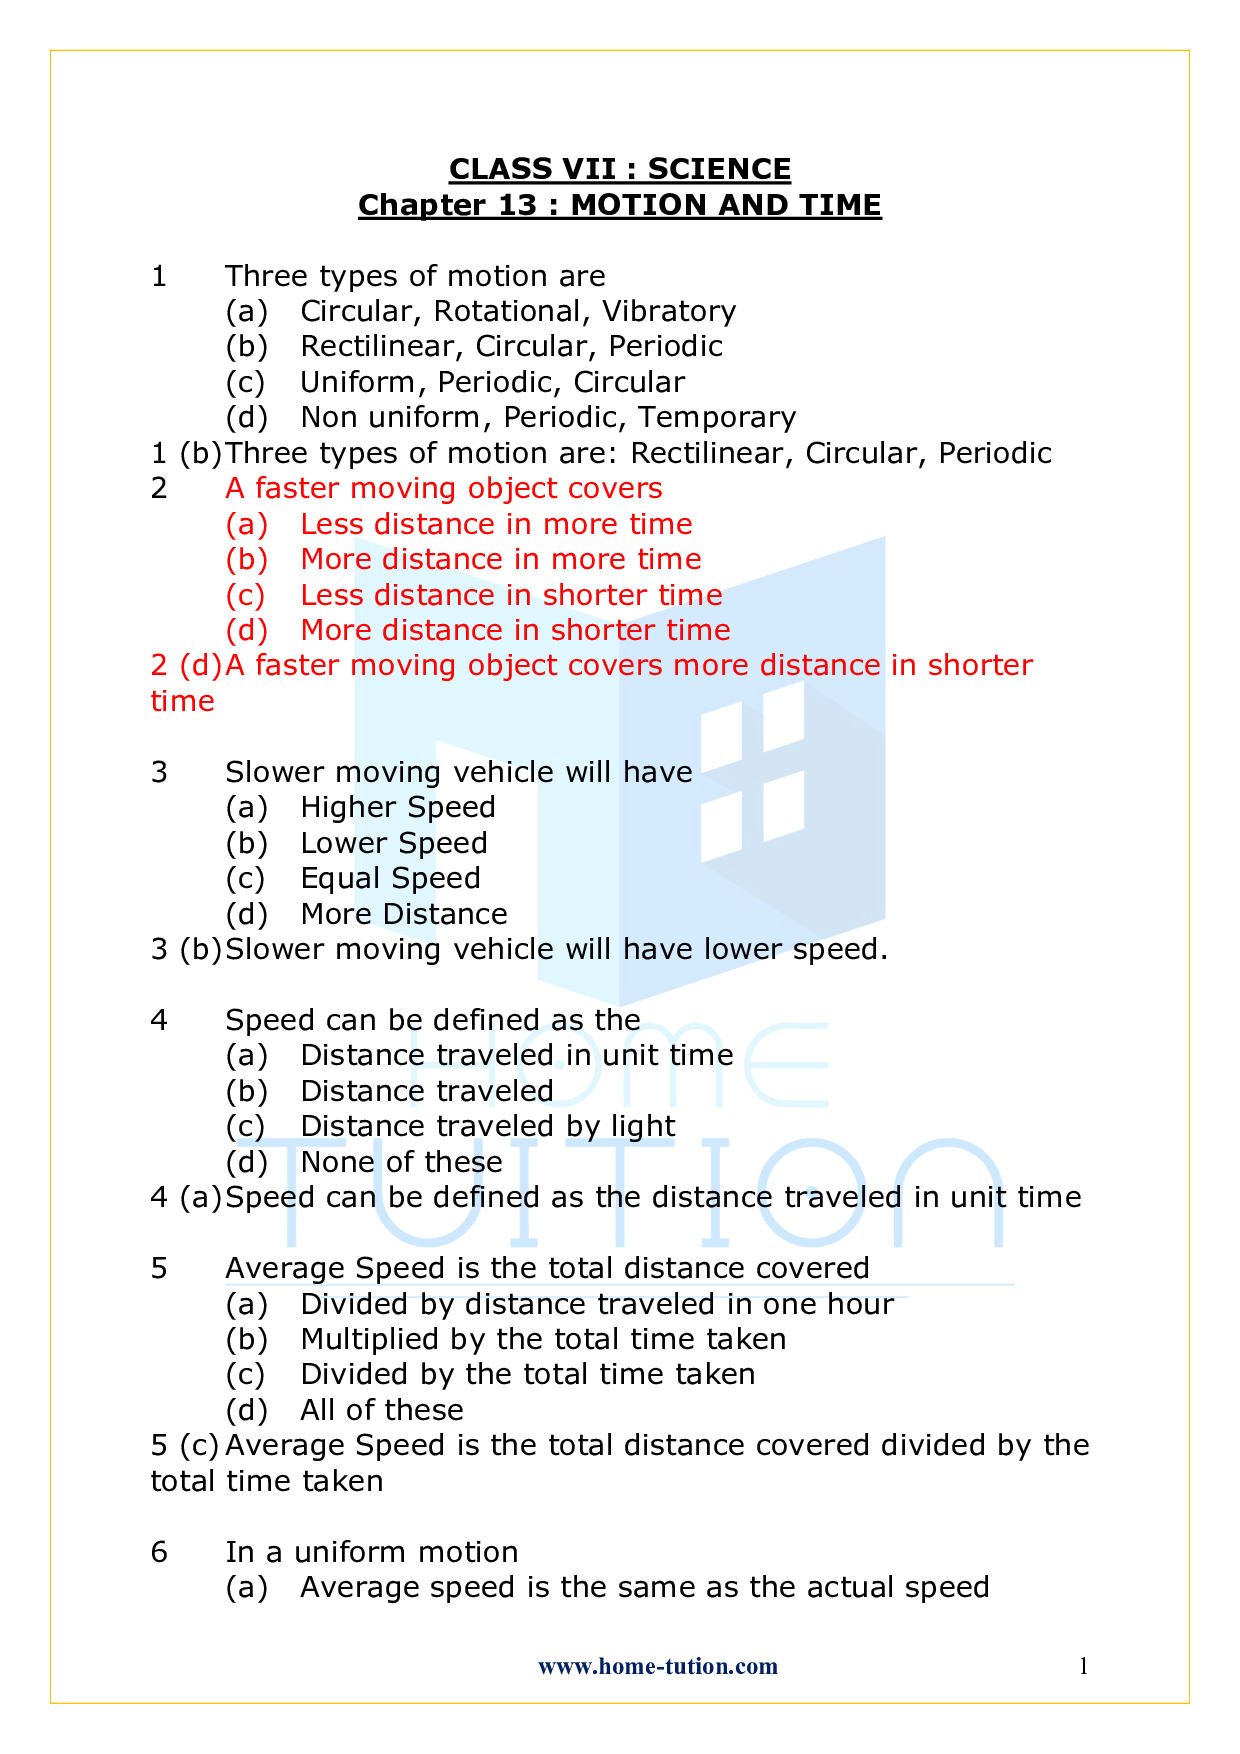 Chapter 13 Motion and time